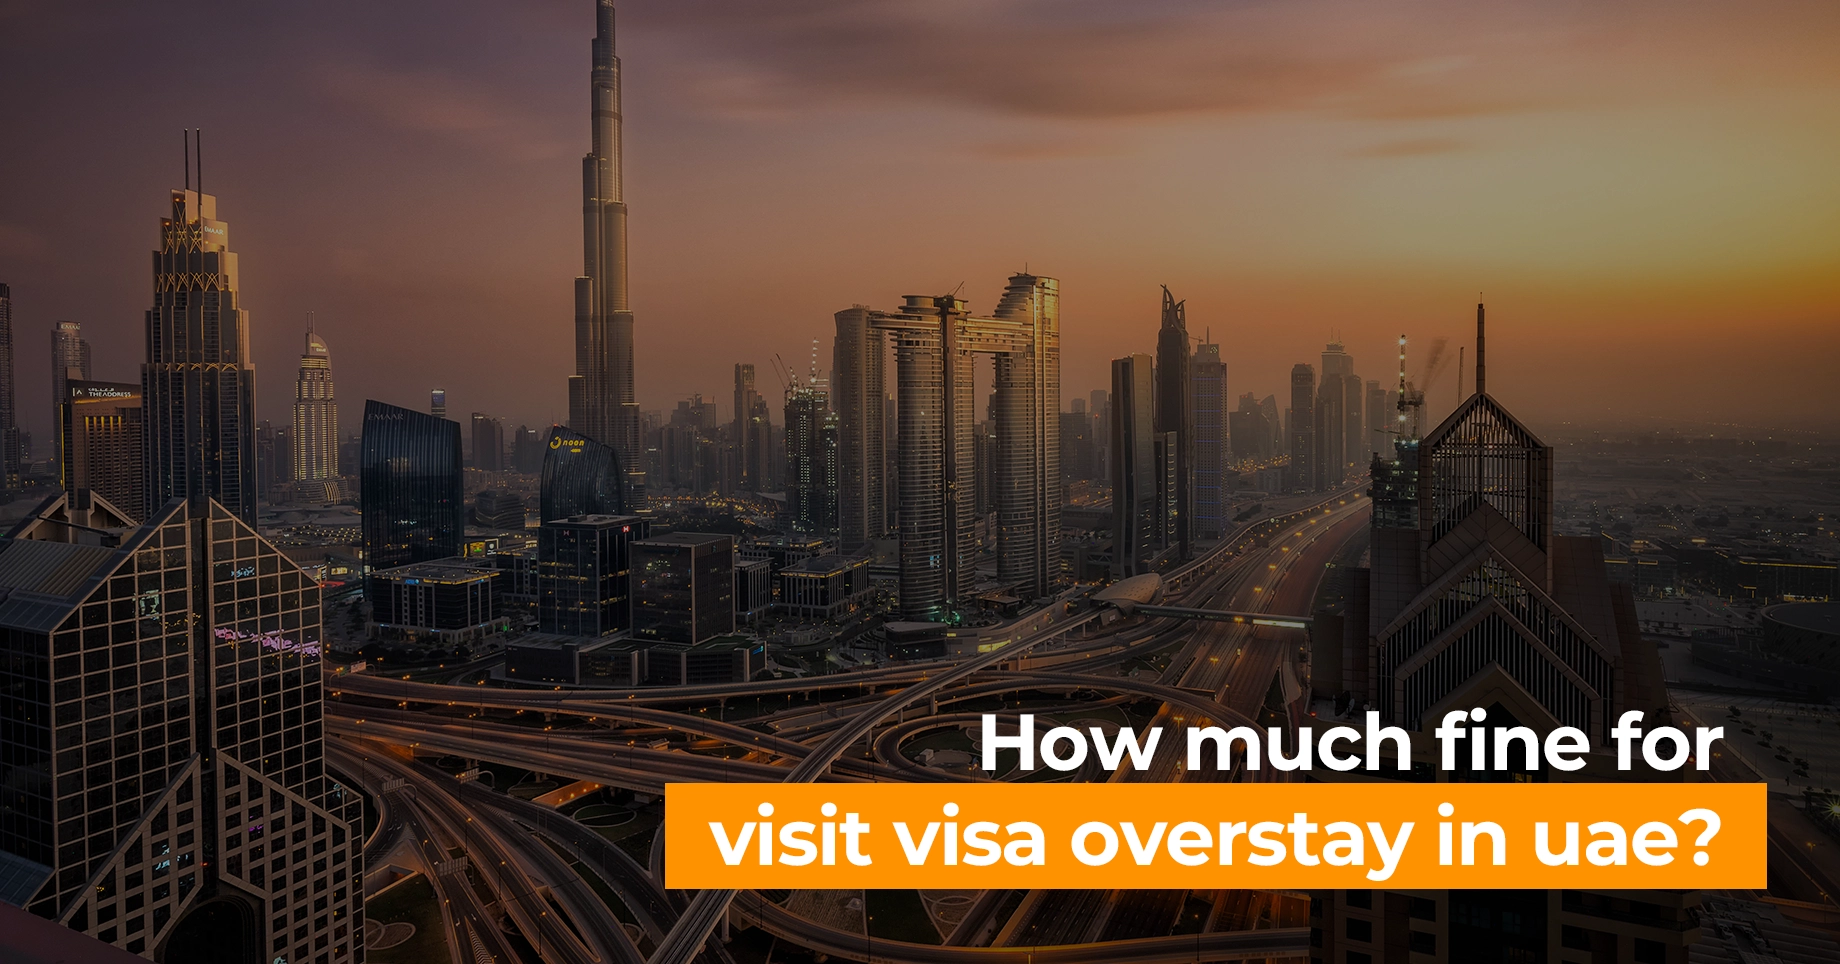 how much fine for visit visa overstay in uae